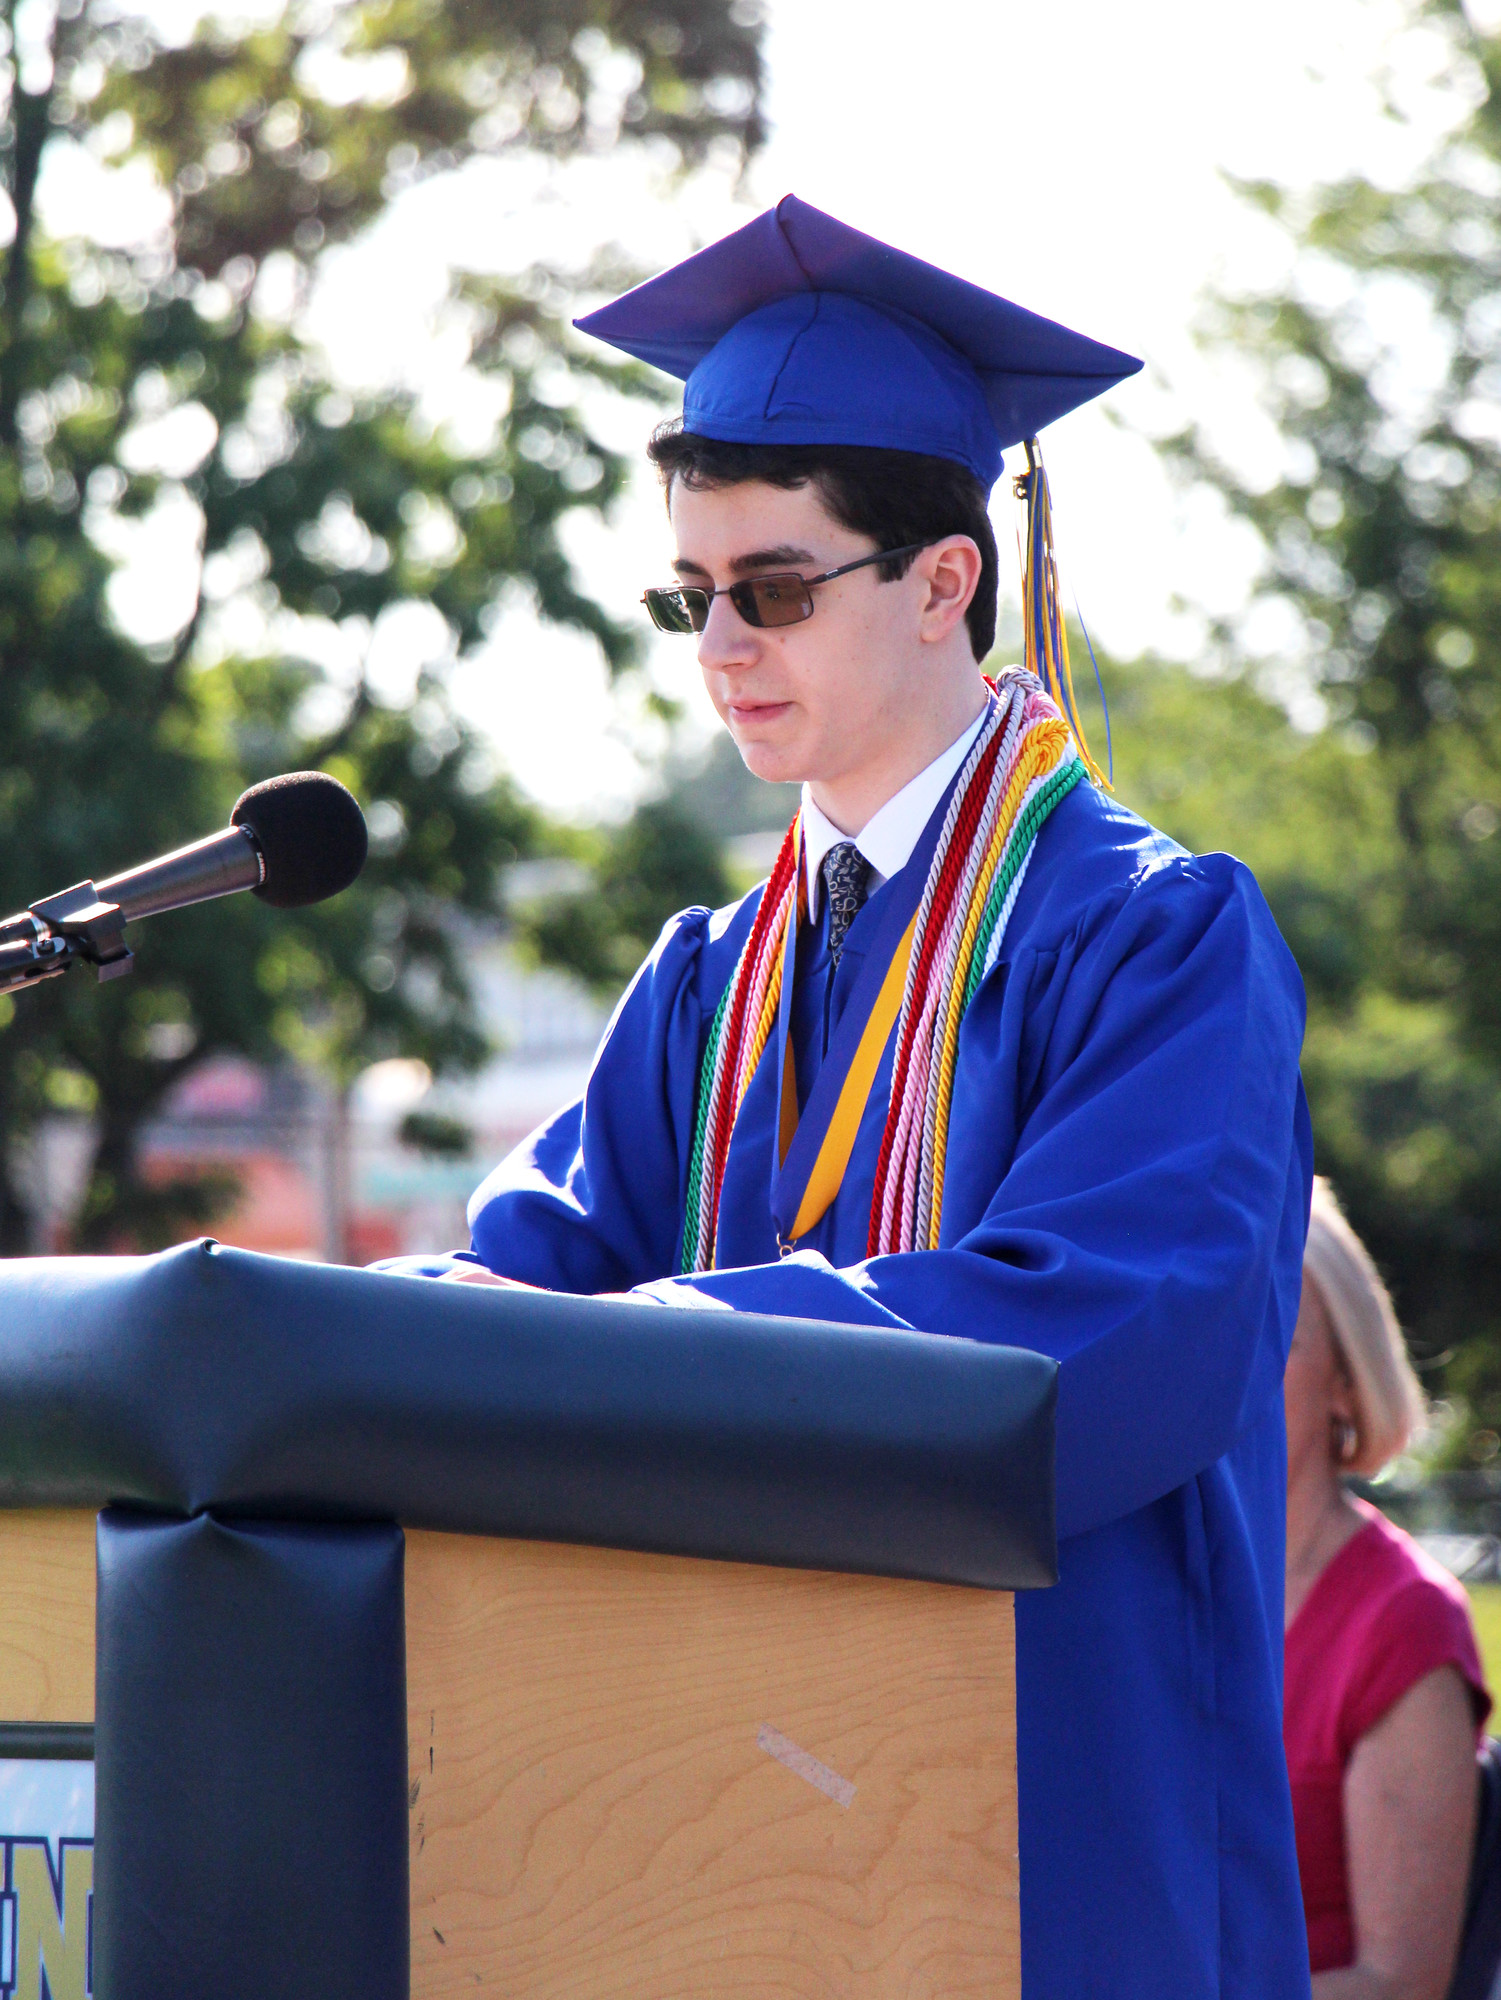 Valedictorian Connor Mack told his classmates that it is how they respond to adversity that will truly define them.